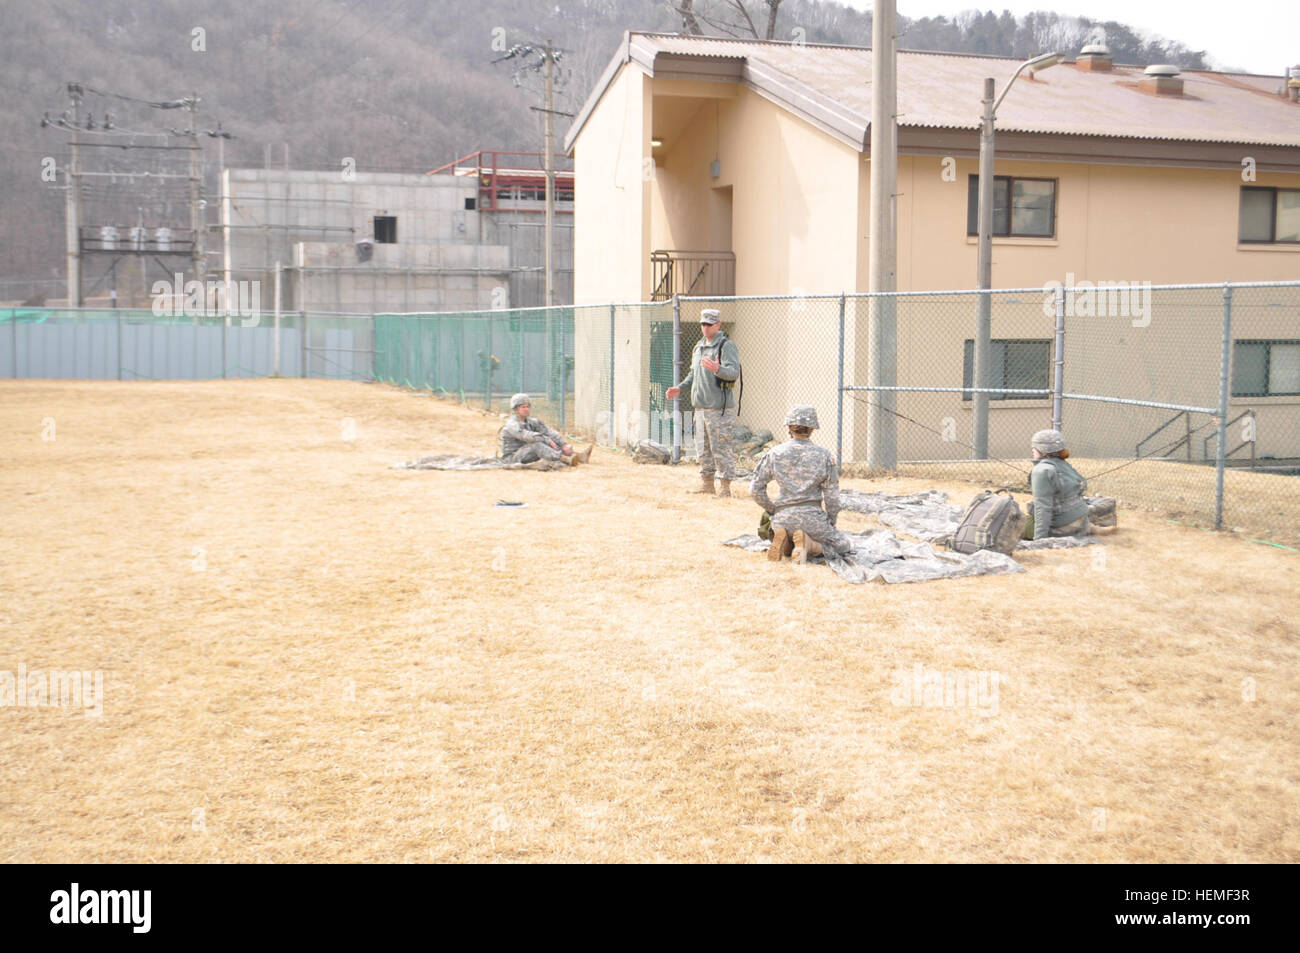 U.S. Soldiers with the 210th Fires Brigade, 2nd Infantry Division take a break from training while preparing for an Expert Field Medical Badge test at Camp Casey in Gyeonggi province, South Korea, Feb. 28, 2013.  (U.S. Army photo by Pfc. Han-byeol Kim/Released) 210th Fires Brigade conducts EFMB train-up 130228-A-WG463-026 Stock Photo